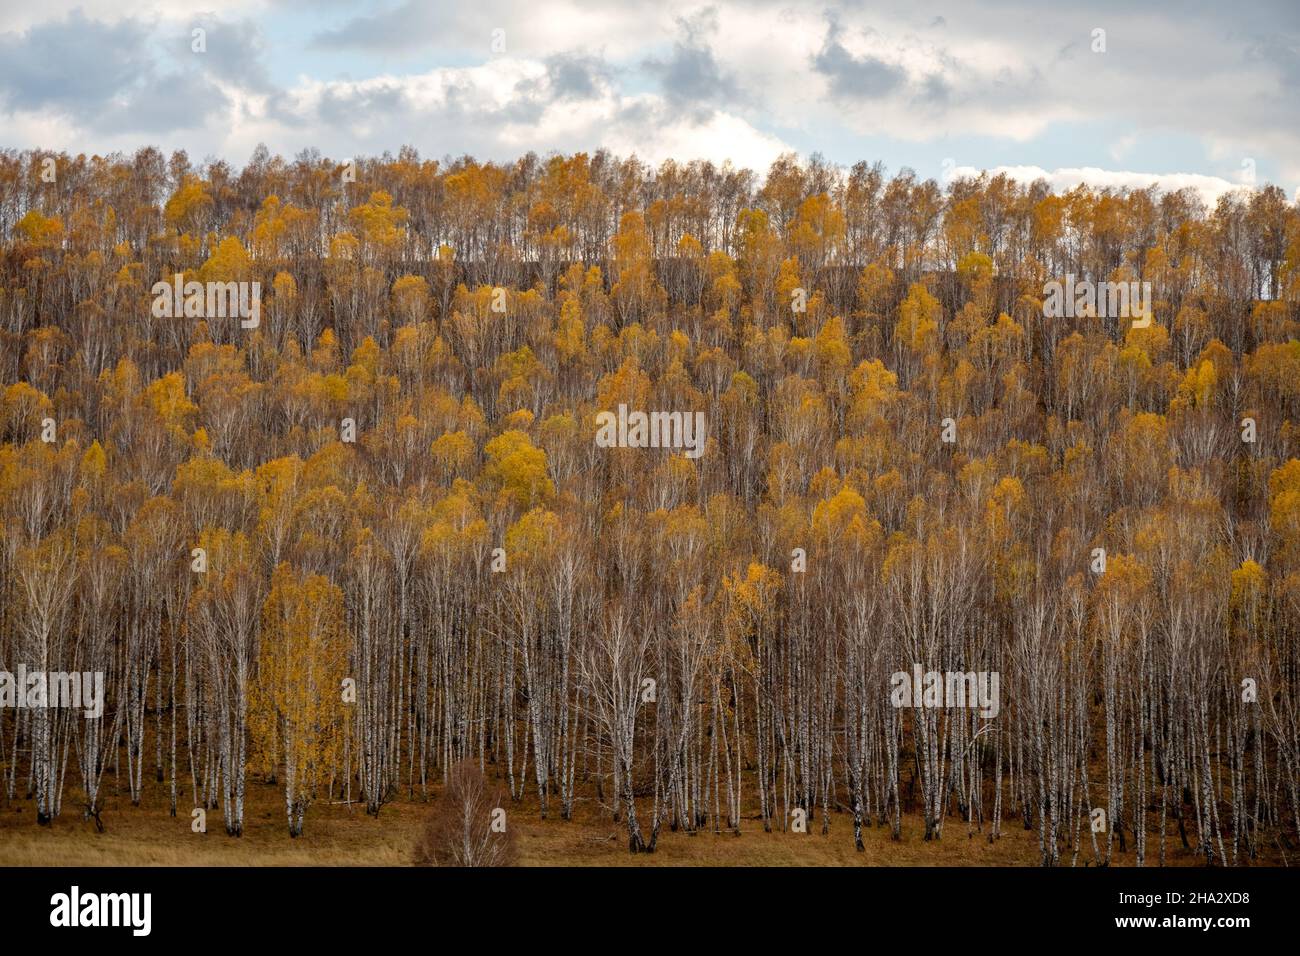 A hill overgrown with Russian white birches with half-fallen yellow foliage on a cloudy day in late autumn. Stock Photo